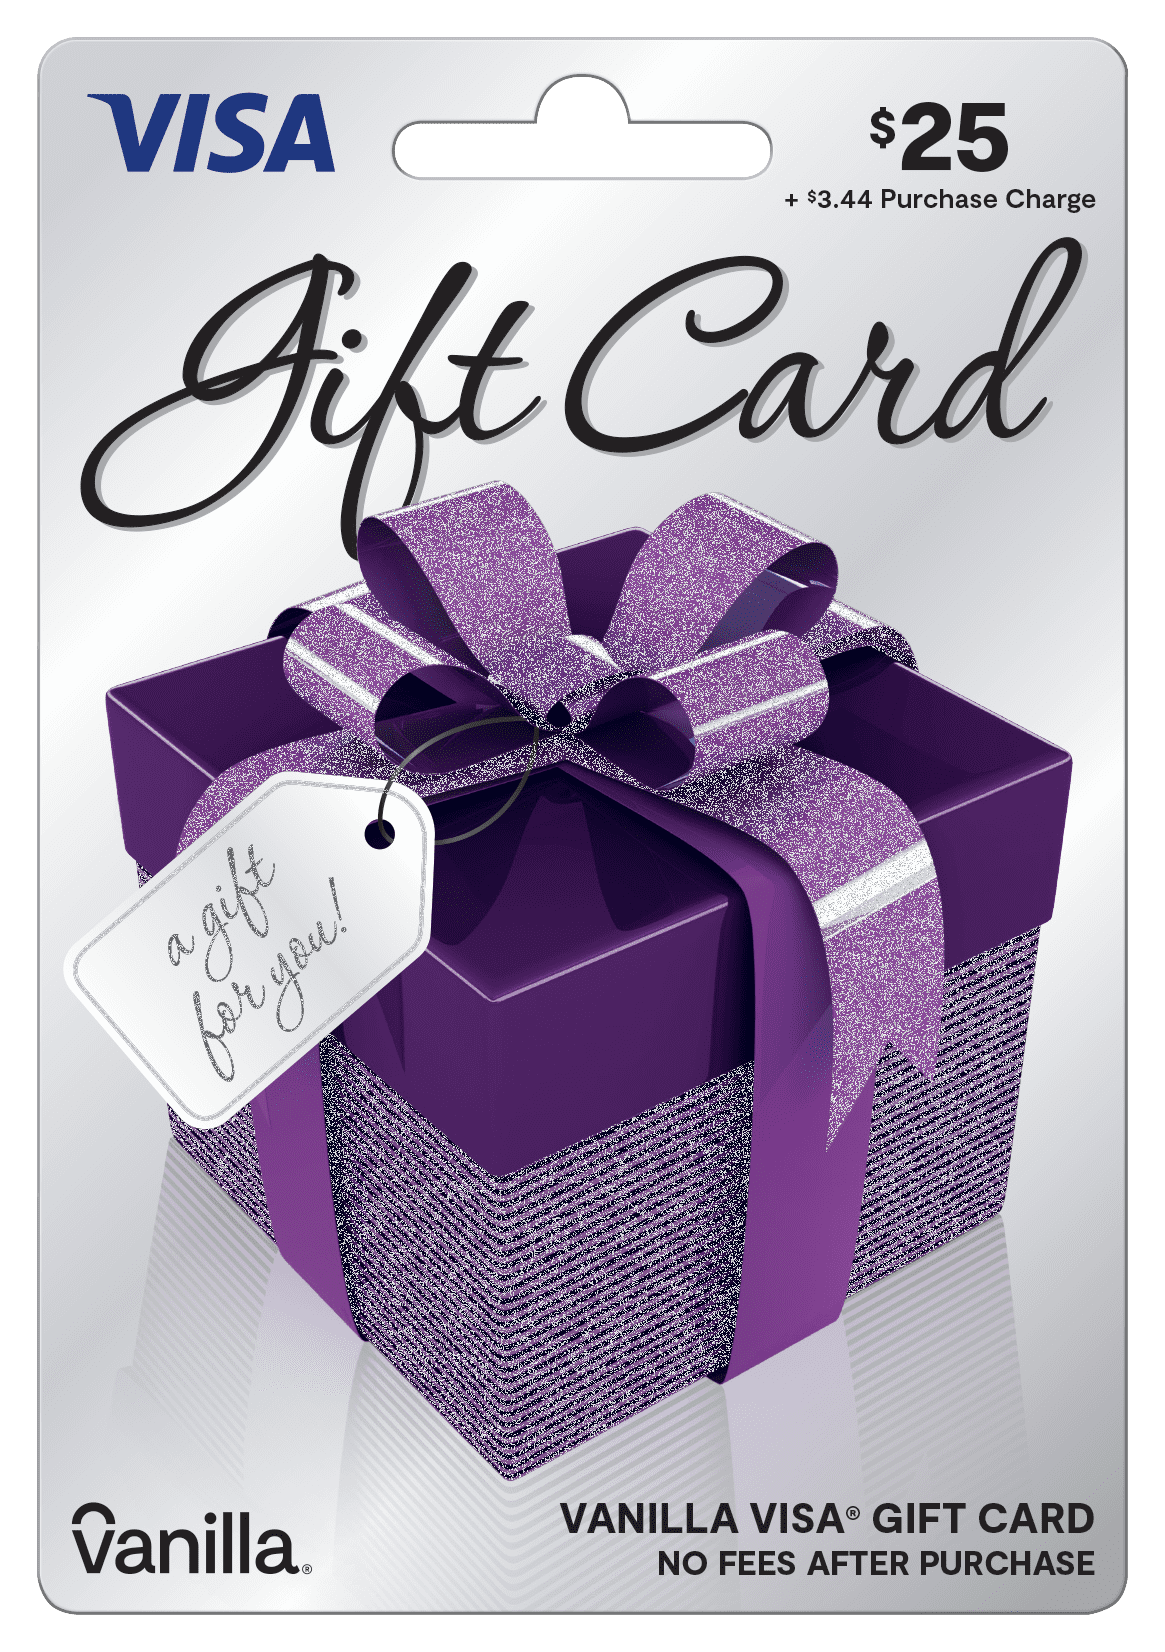 Buy Gift Cards Online. Send To Anyone Via Email. No Fees